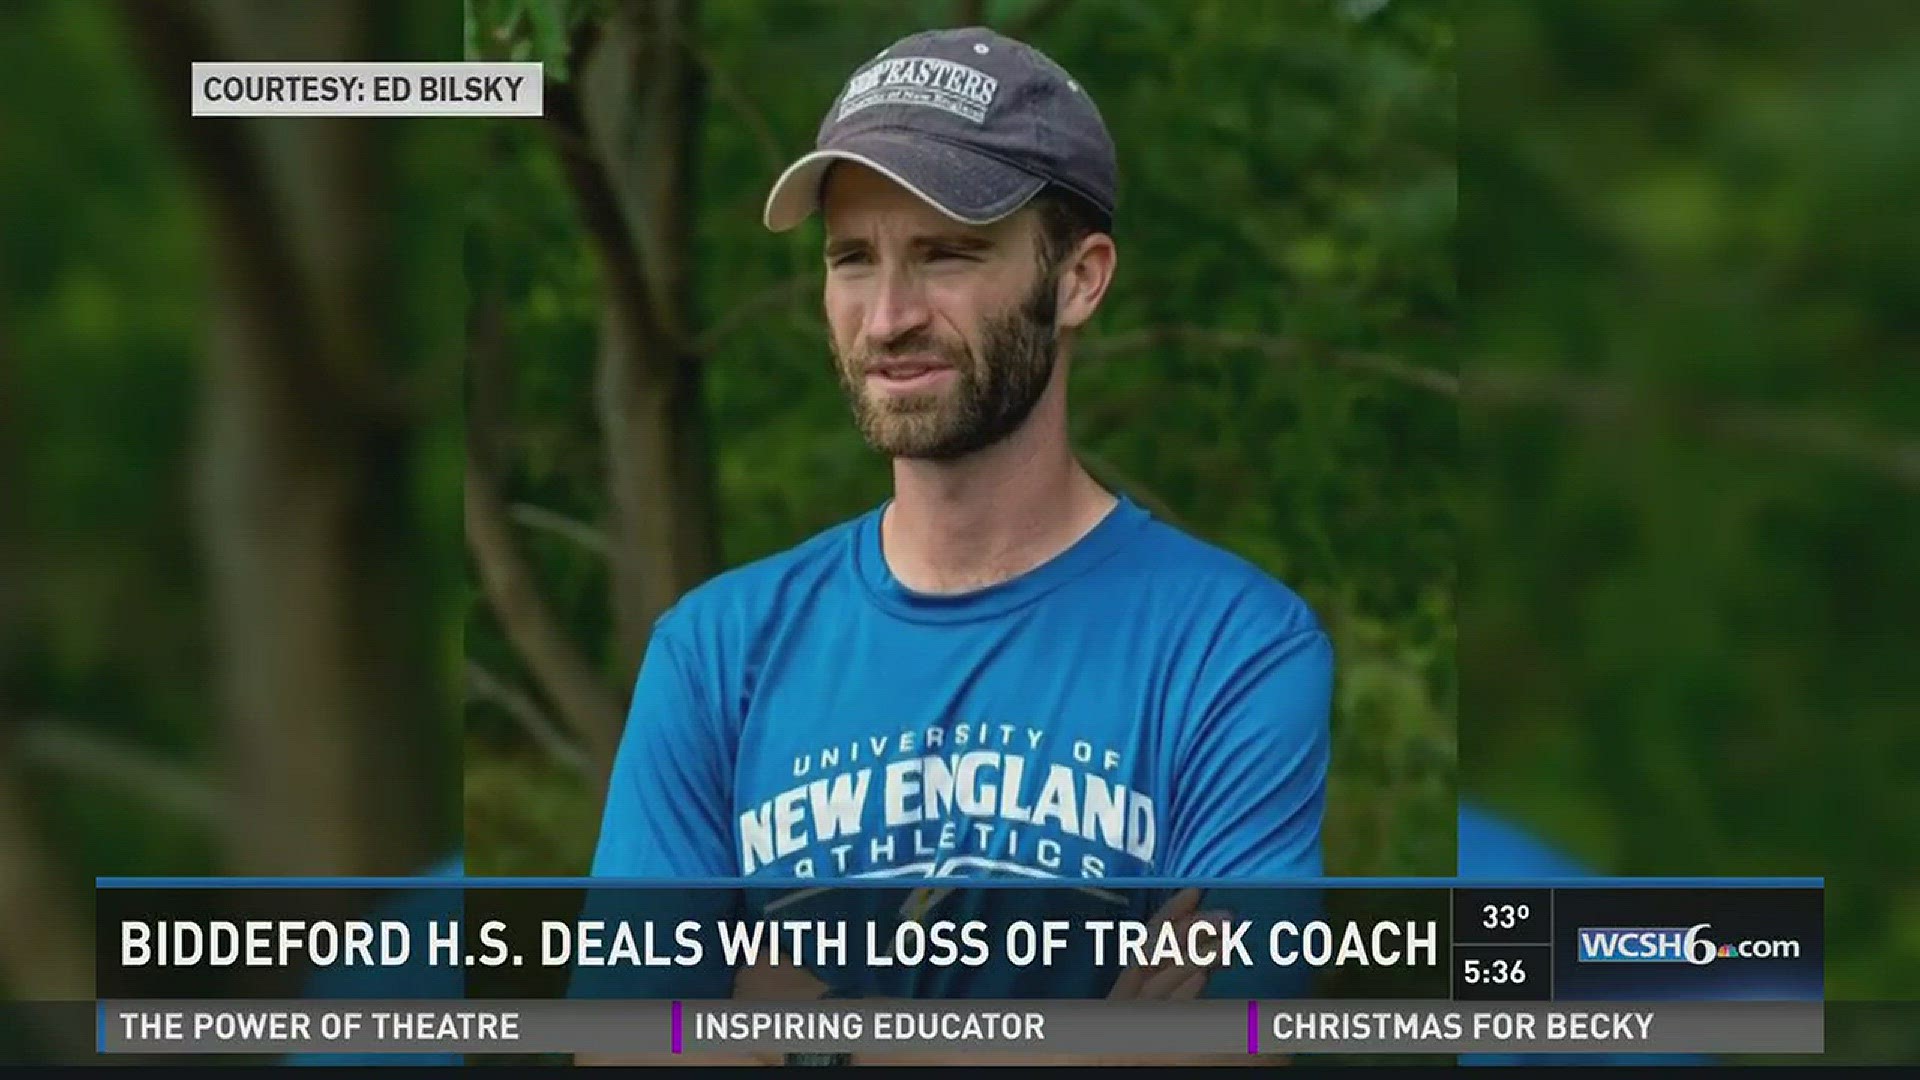 Biddeford H.S. deals with loss of track coach